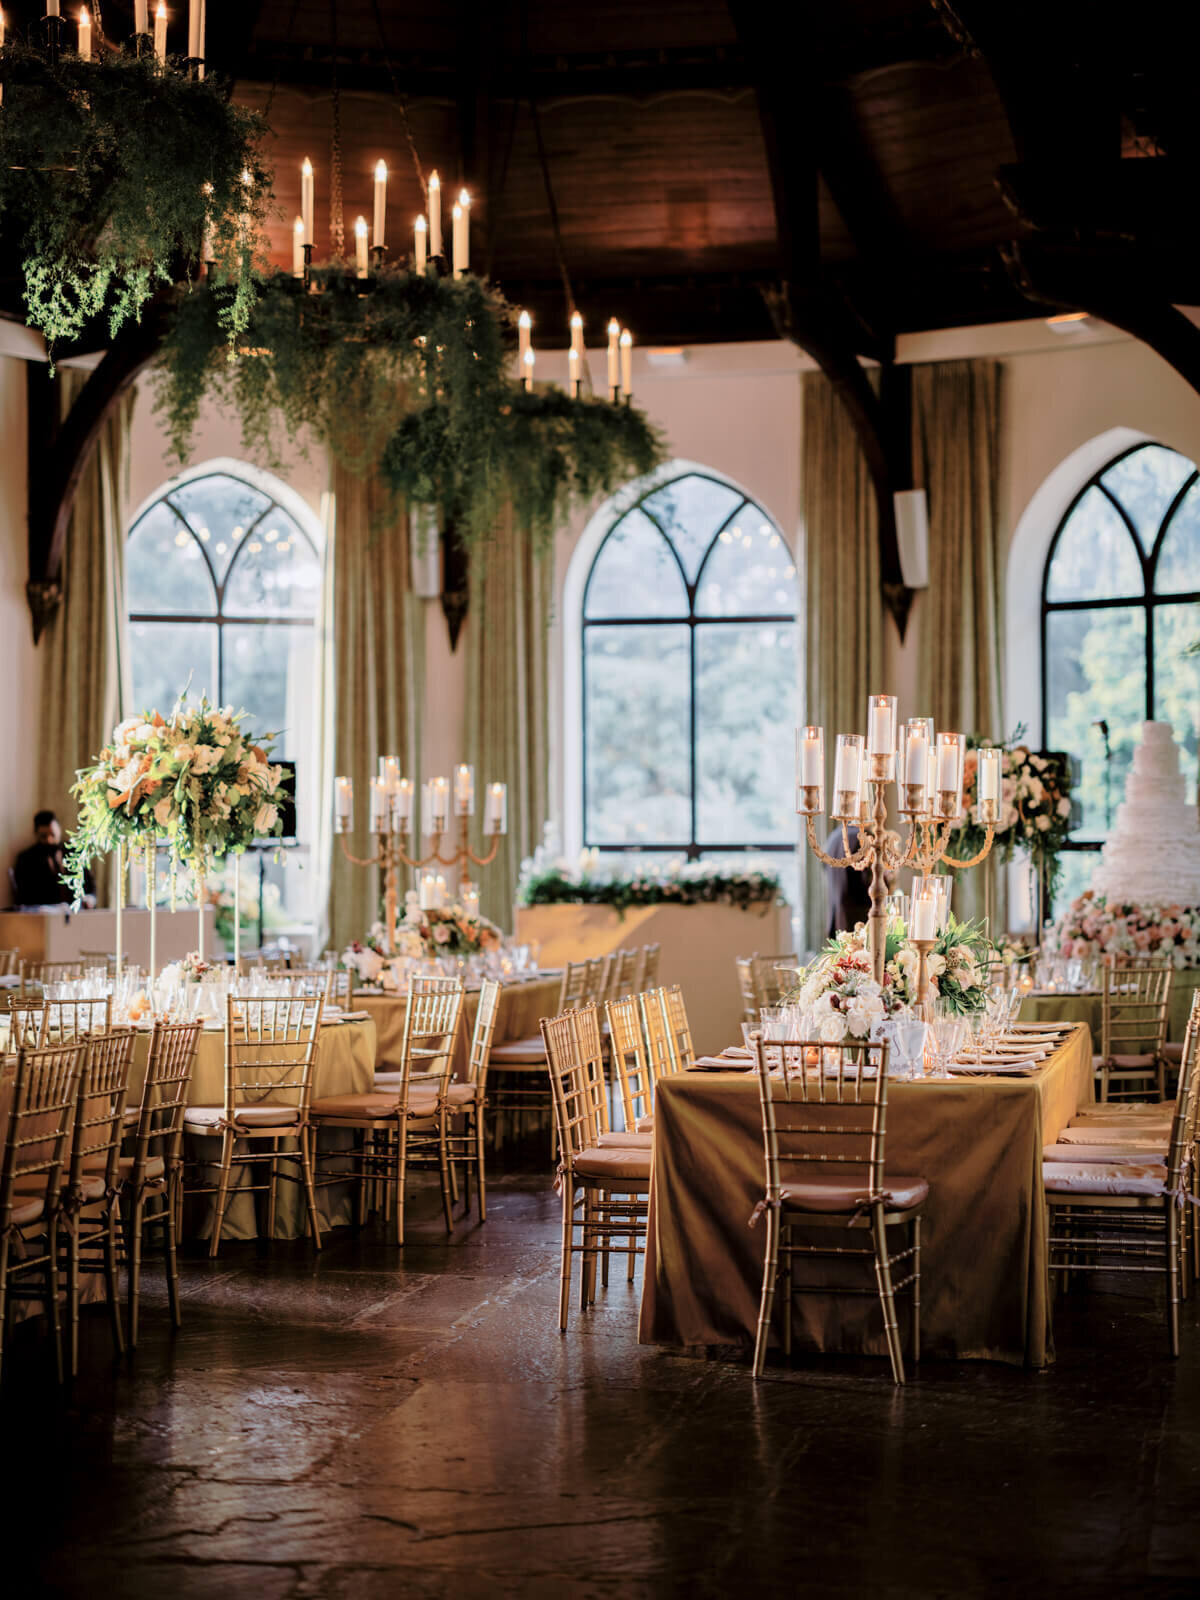 Elegant wedding reception room with chandeliers and bronze tables and chairs with large flower bouquet and candle centerpieces.